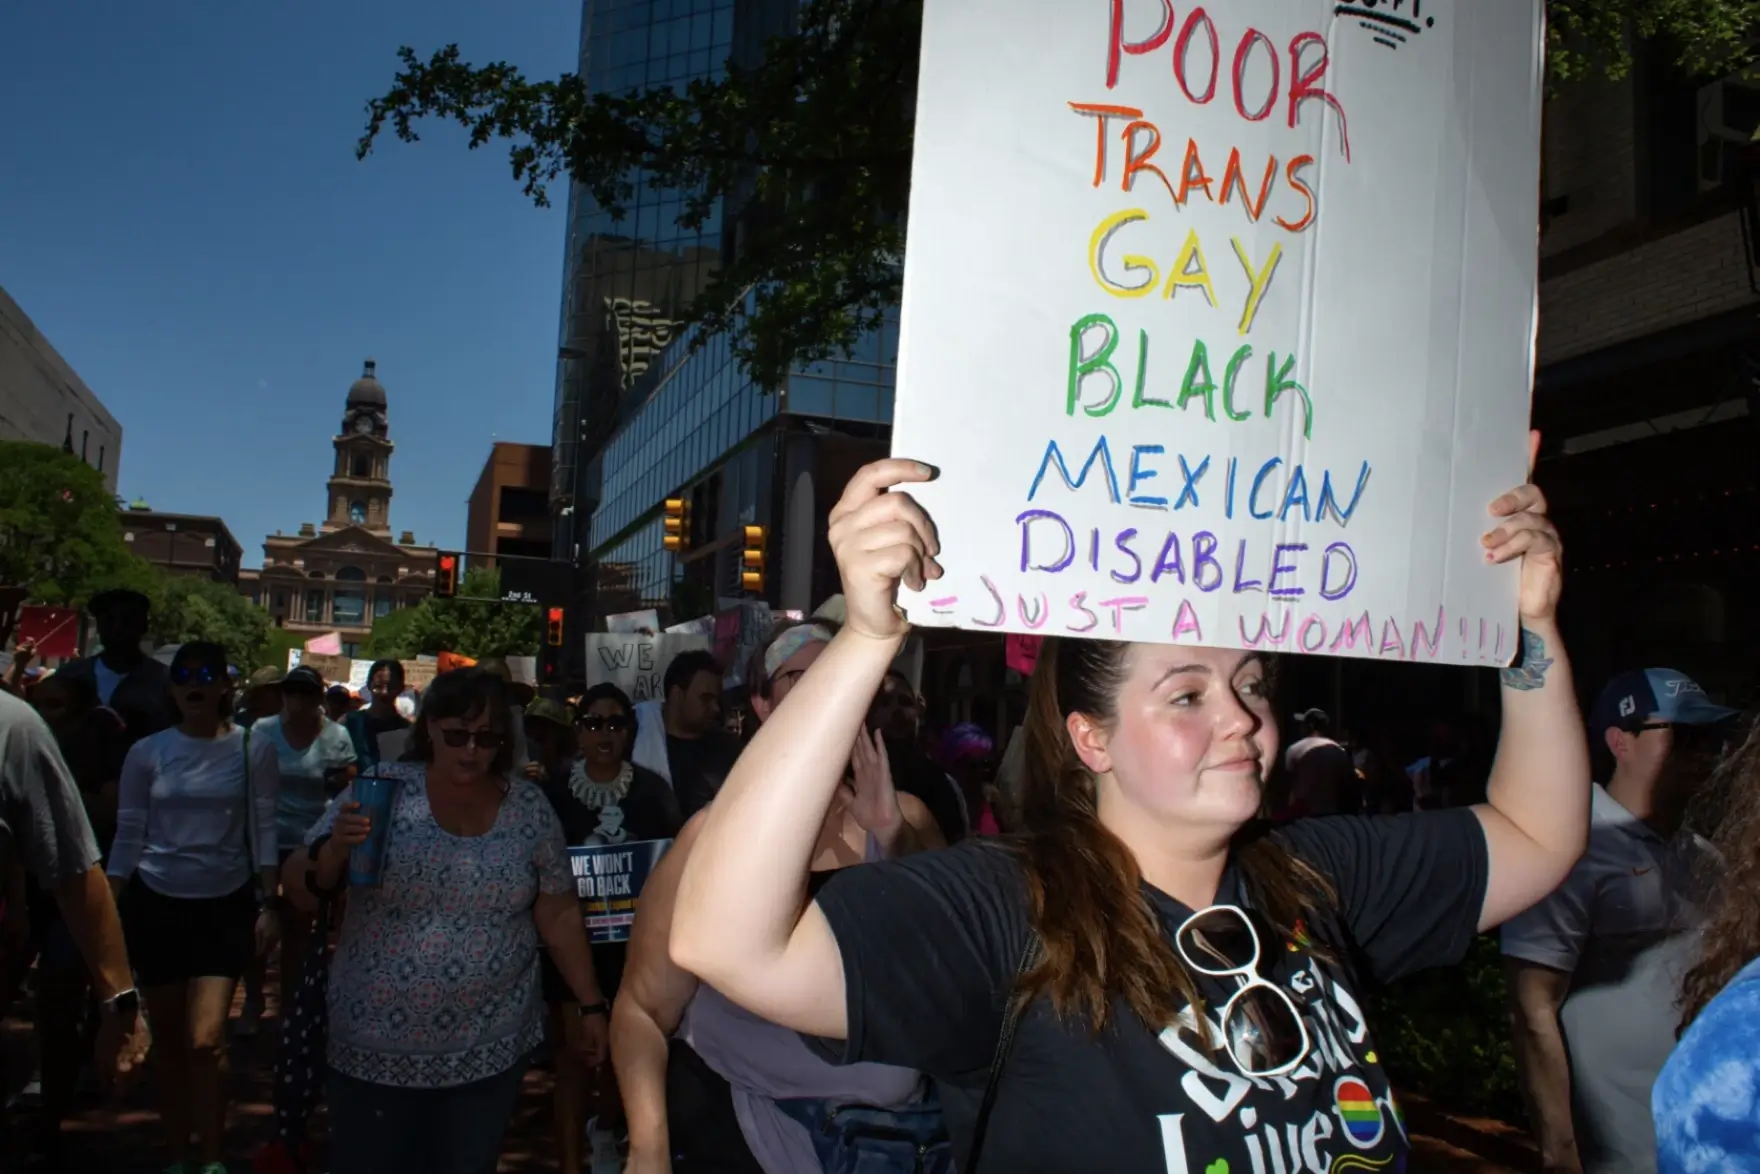 Group of women on a protest holding banners of equality including Poor, Trans, Gay, Black, Mexican, Disabled.